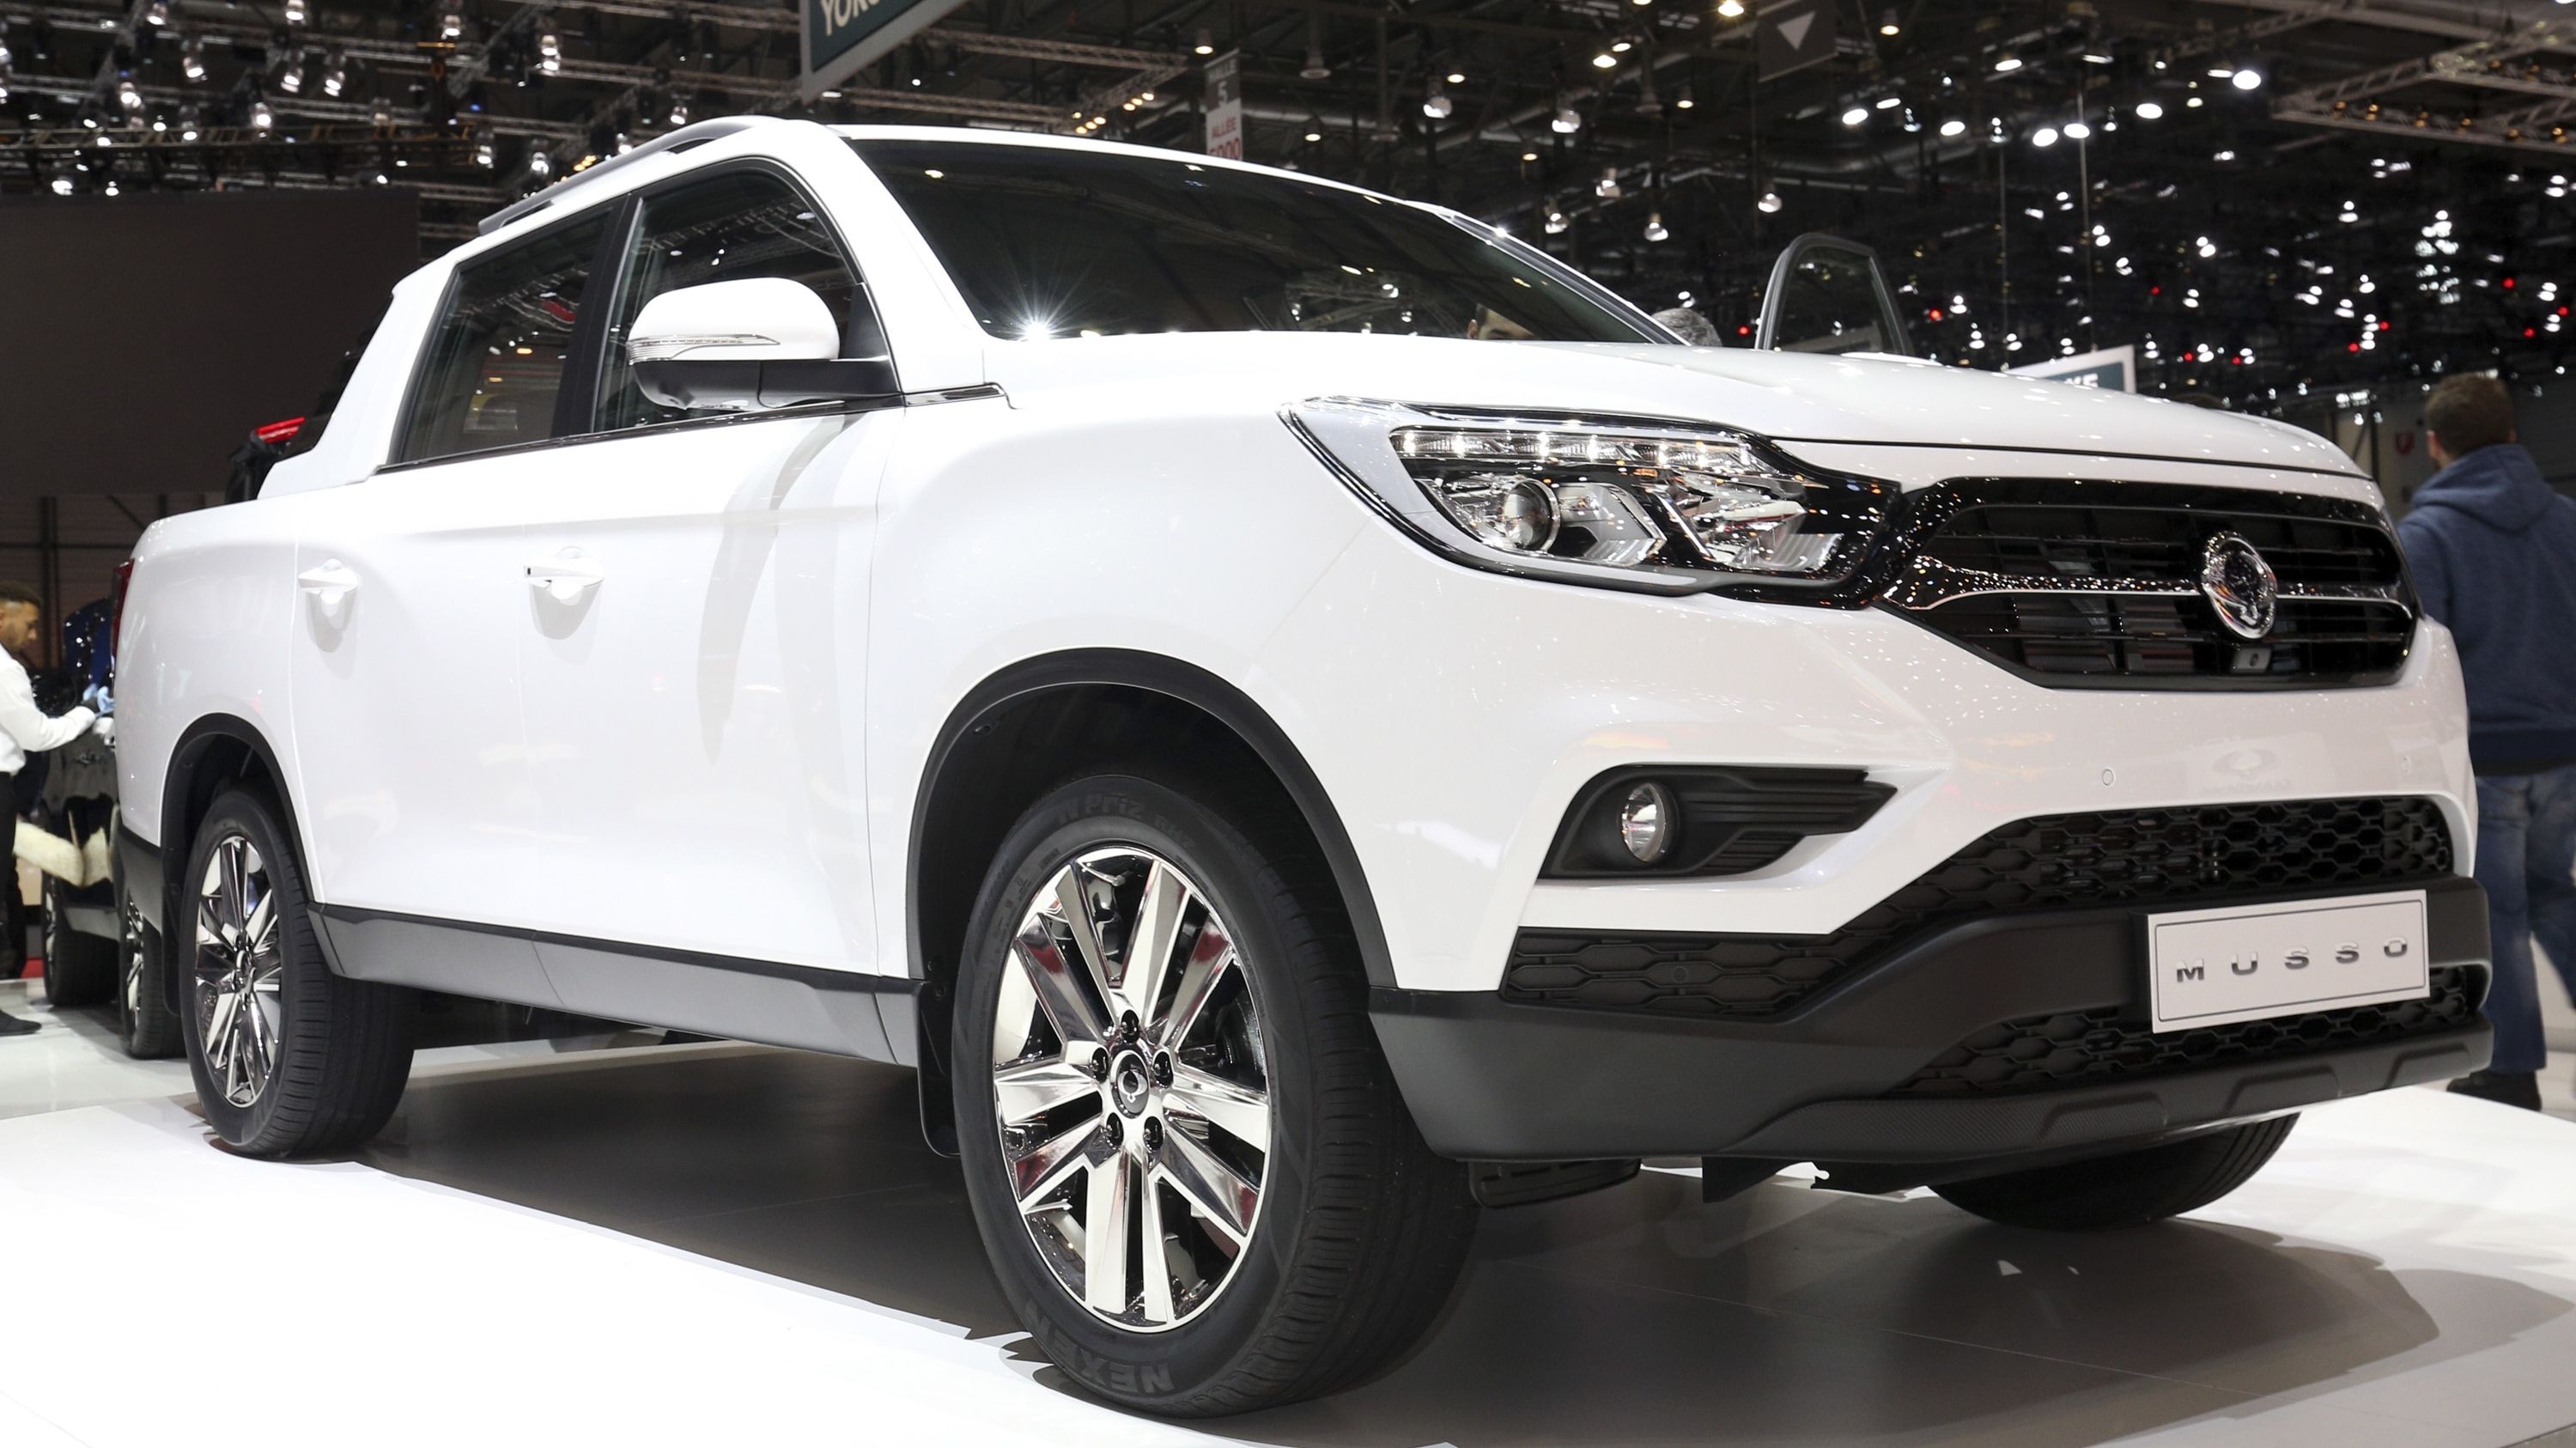 2019  SsangYong Musso Pickup Comes to Attack European Market